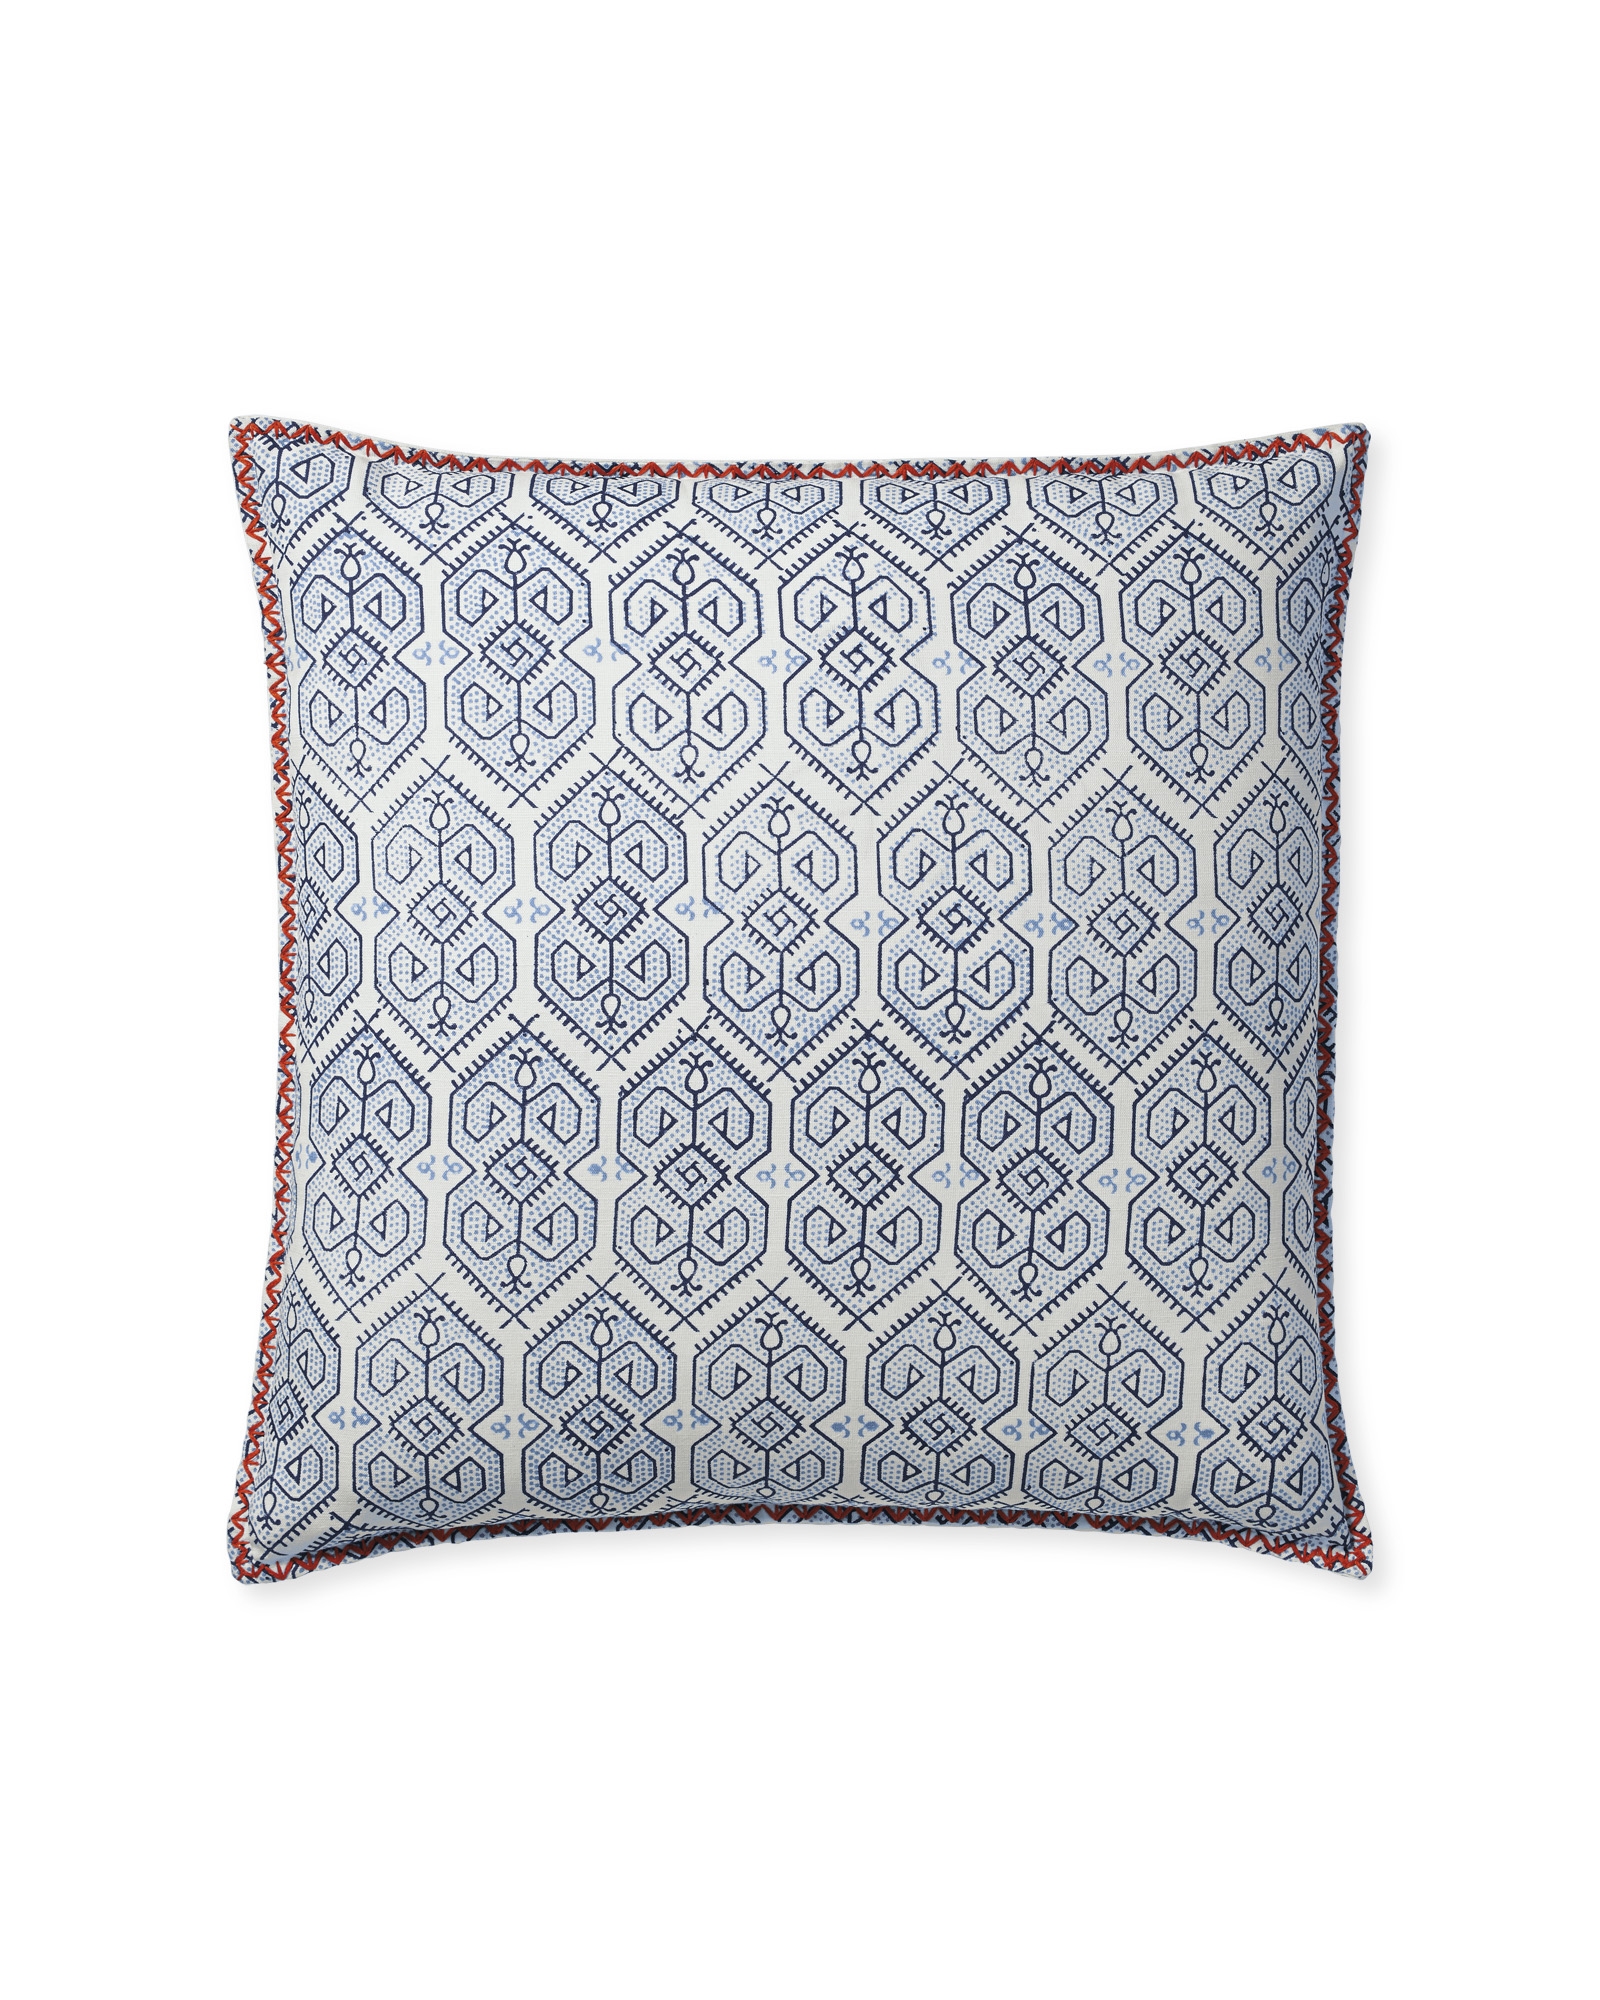 Jamesport 20" SQ Pillow Cover - Navy - Insert sold separately - Image 0